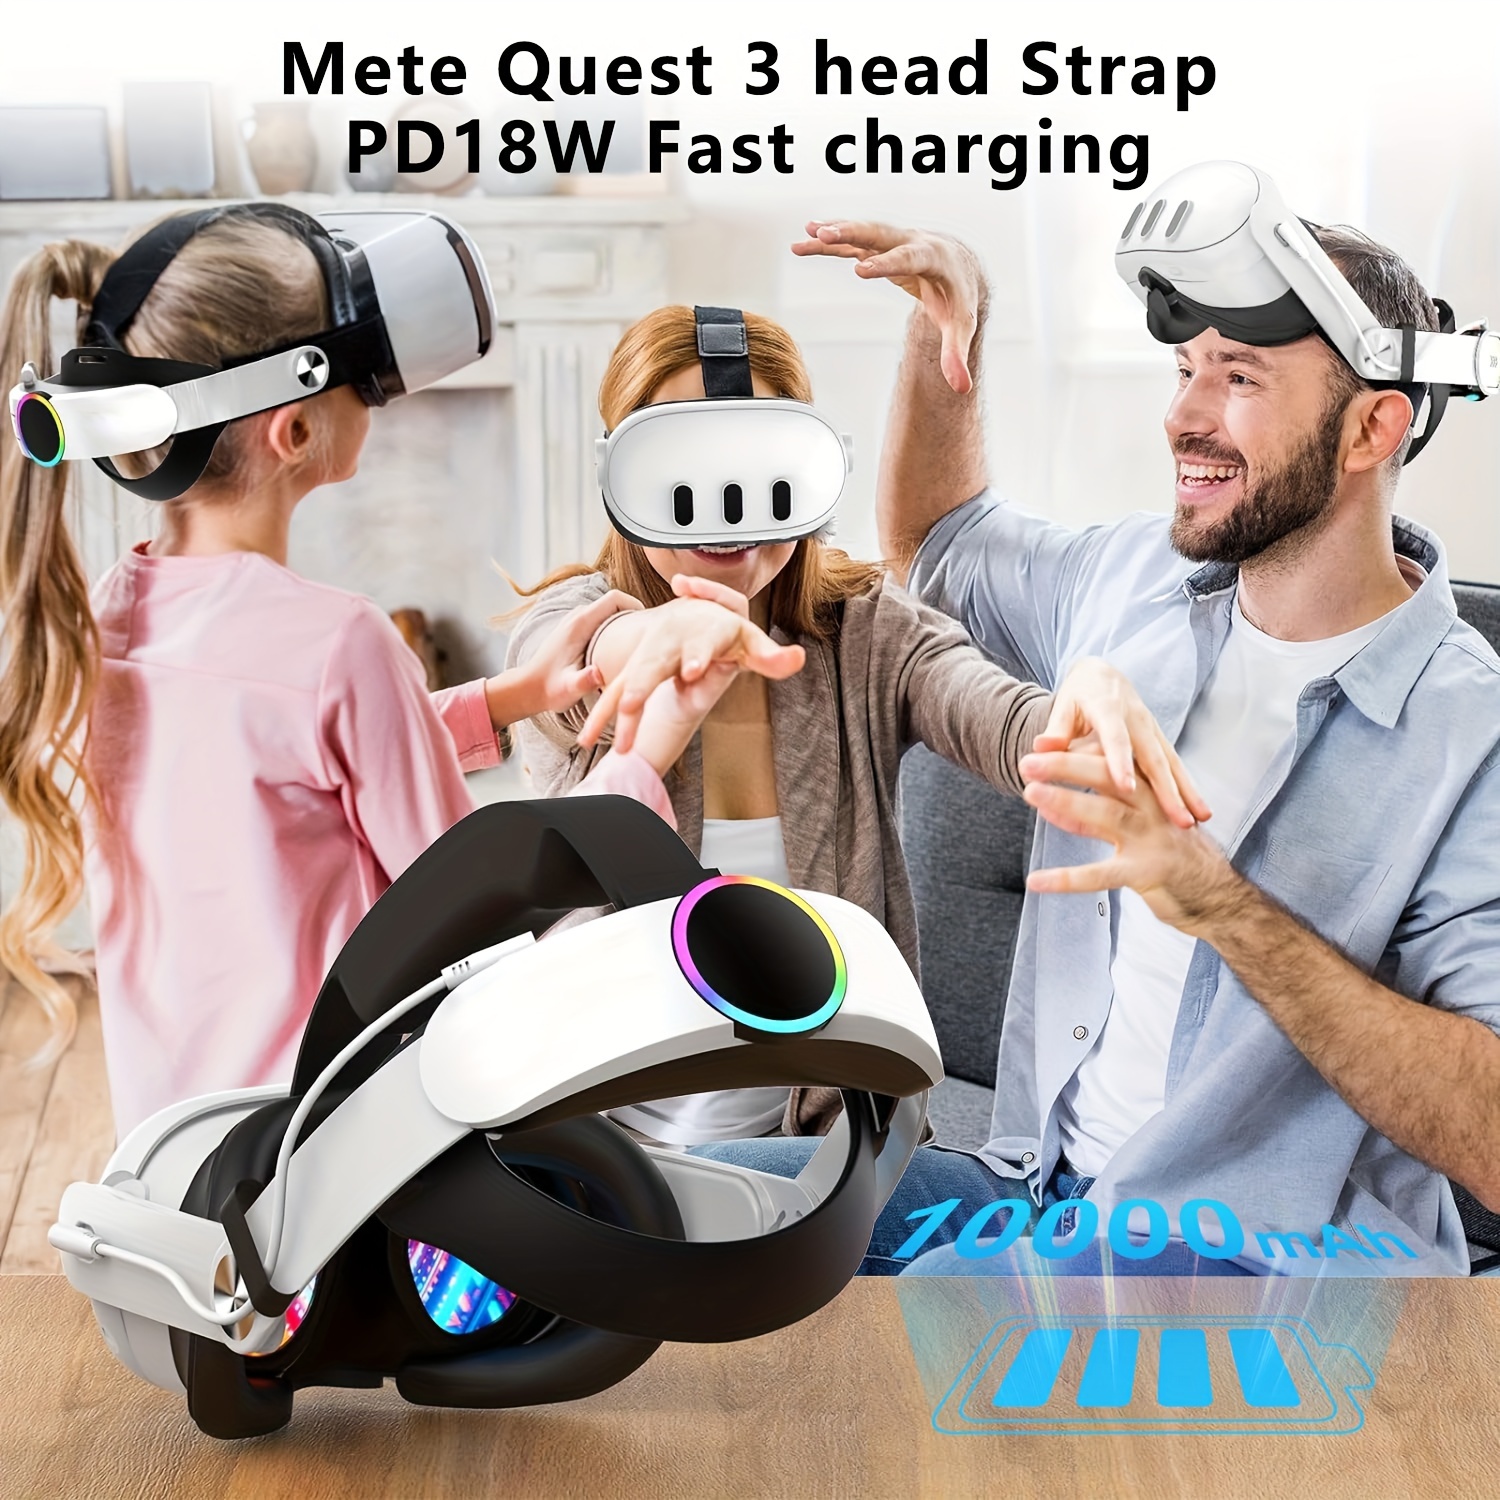 Battery Head Strap Compatible with Meta Quest 3, 6000mAh Elite Strap  Replacement for Enhanced Comfort and Play Time, Adjustable Headstrap with  Battery